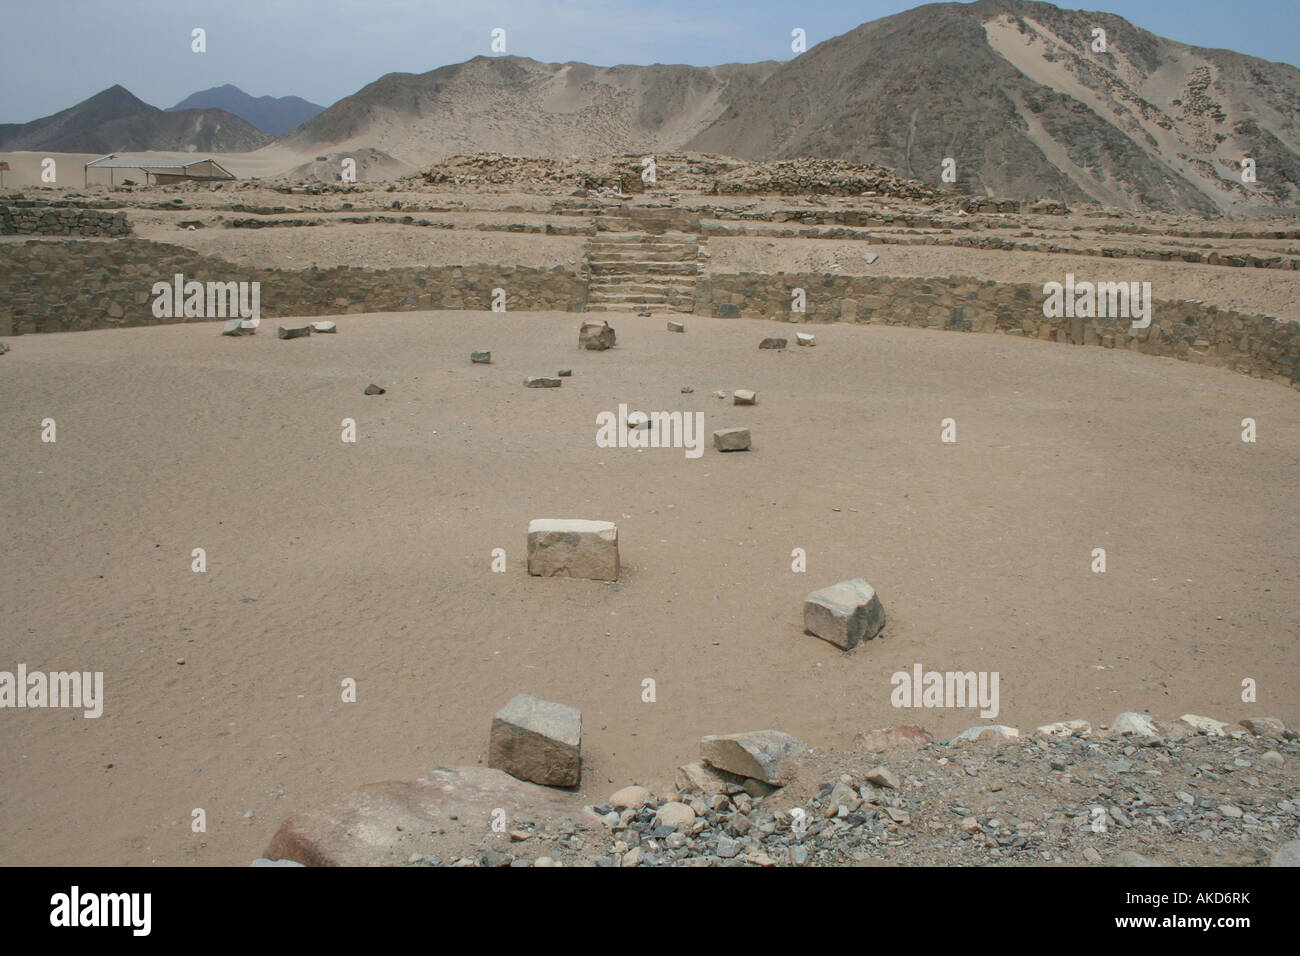 Circular plaza of the 5,000 year old ruins of Caral, 120 miles north of Peru's capital of Lima, in the Supe River Valley. Stock Photo